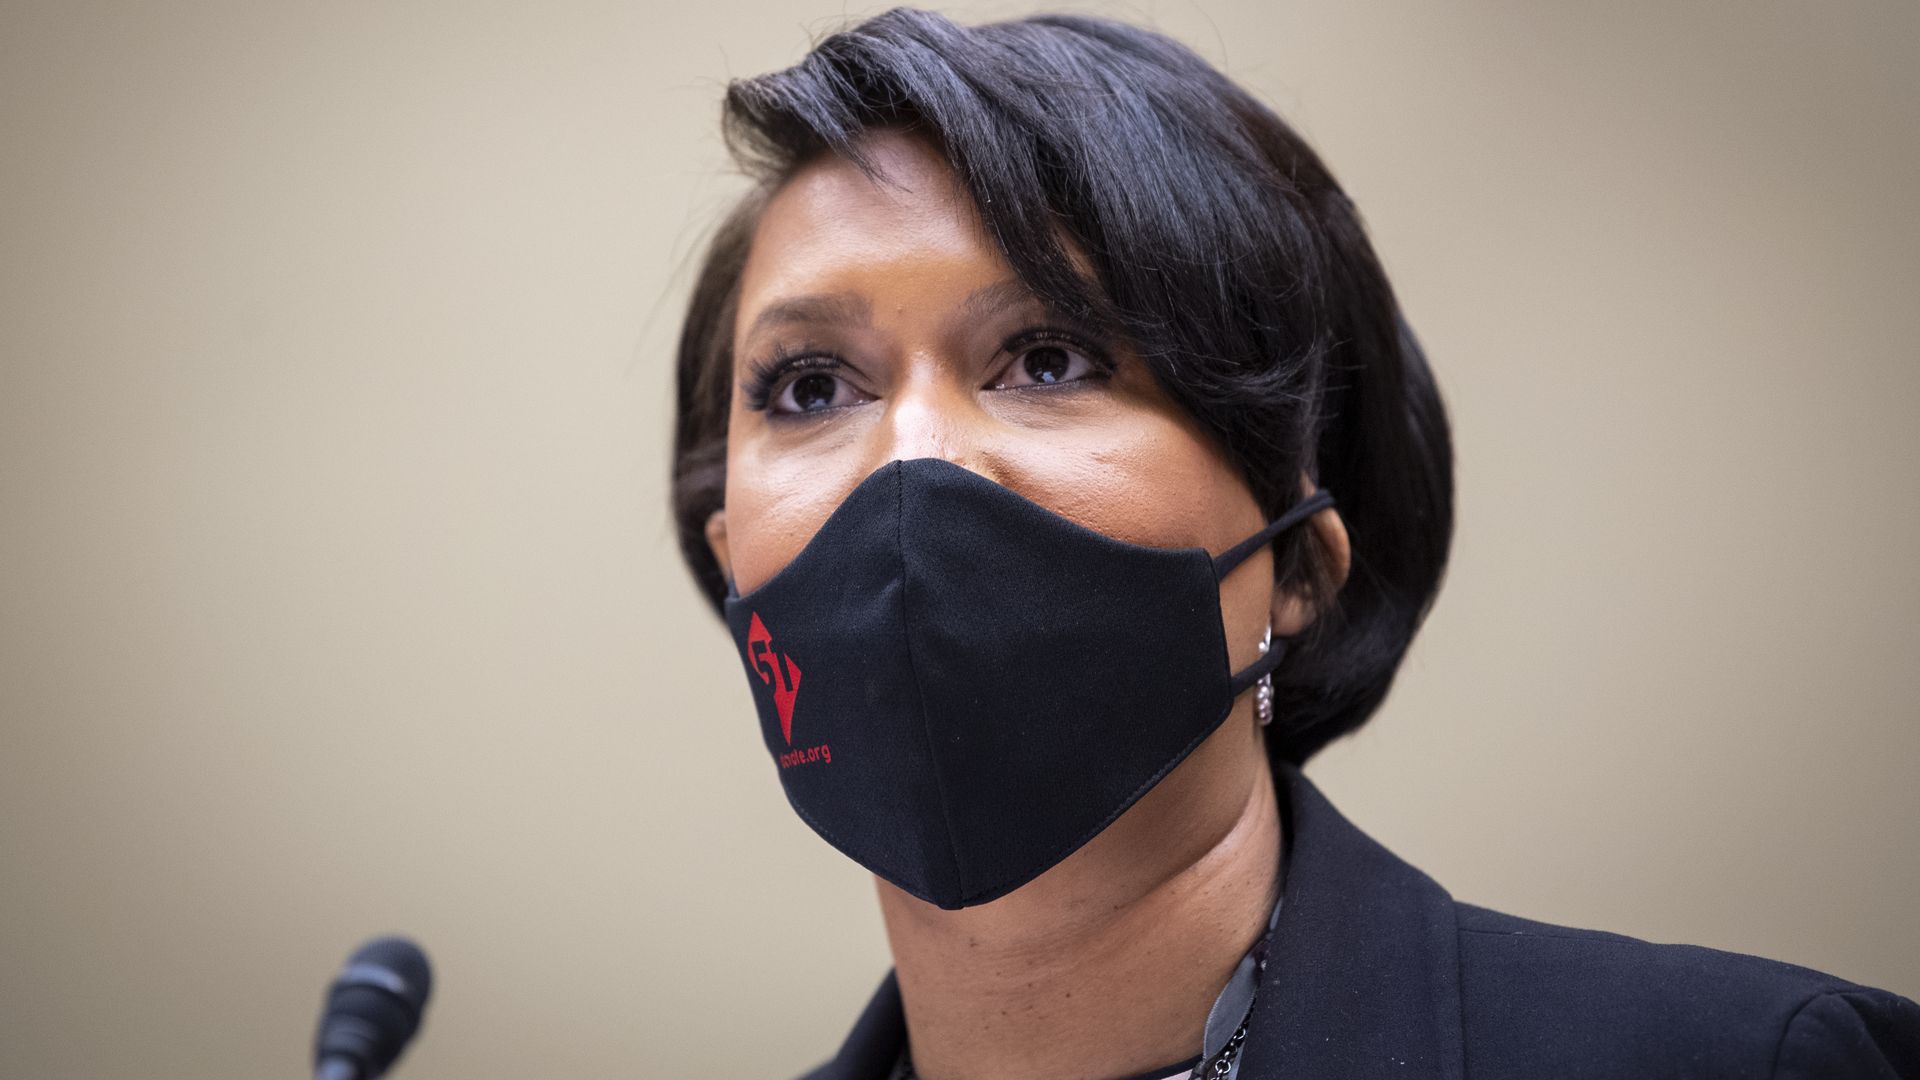 Washington, D.C, Mayor Muriel Bowser wearing a mask while testifying before Congress in March 2021.